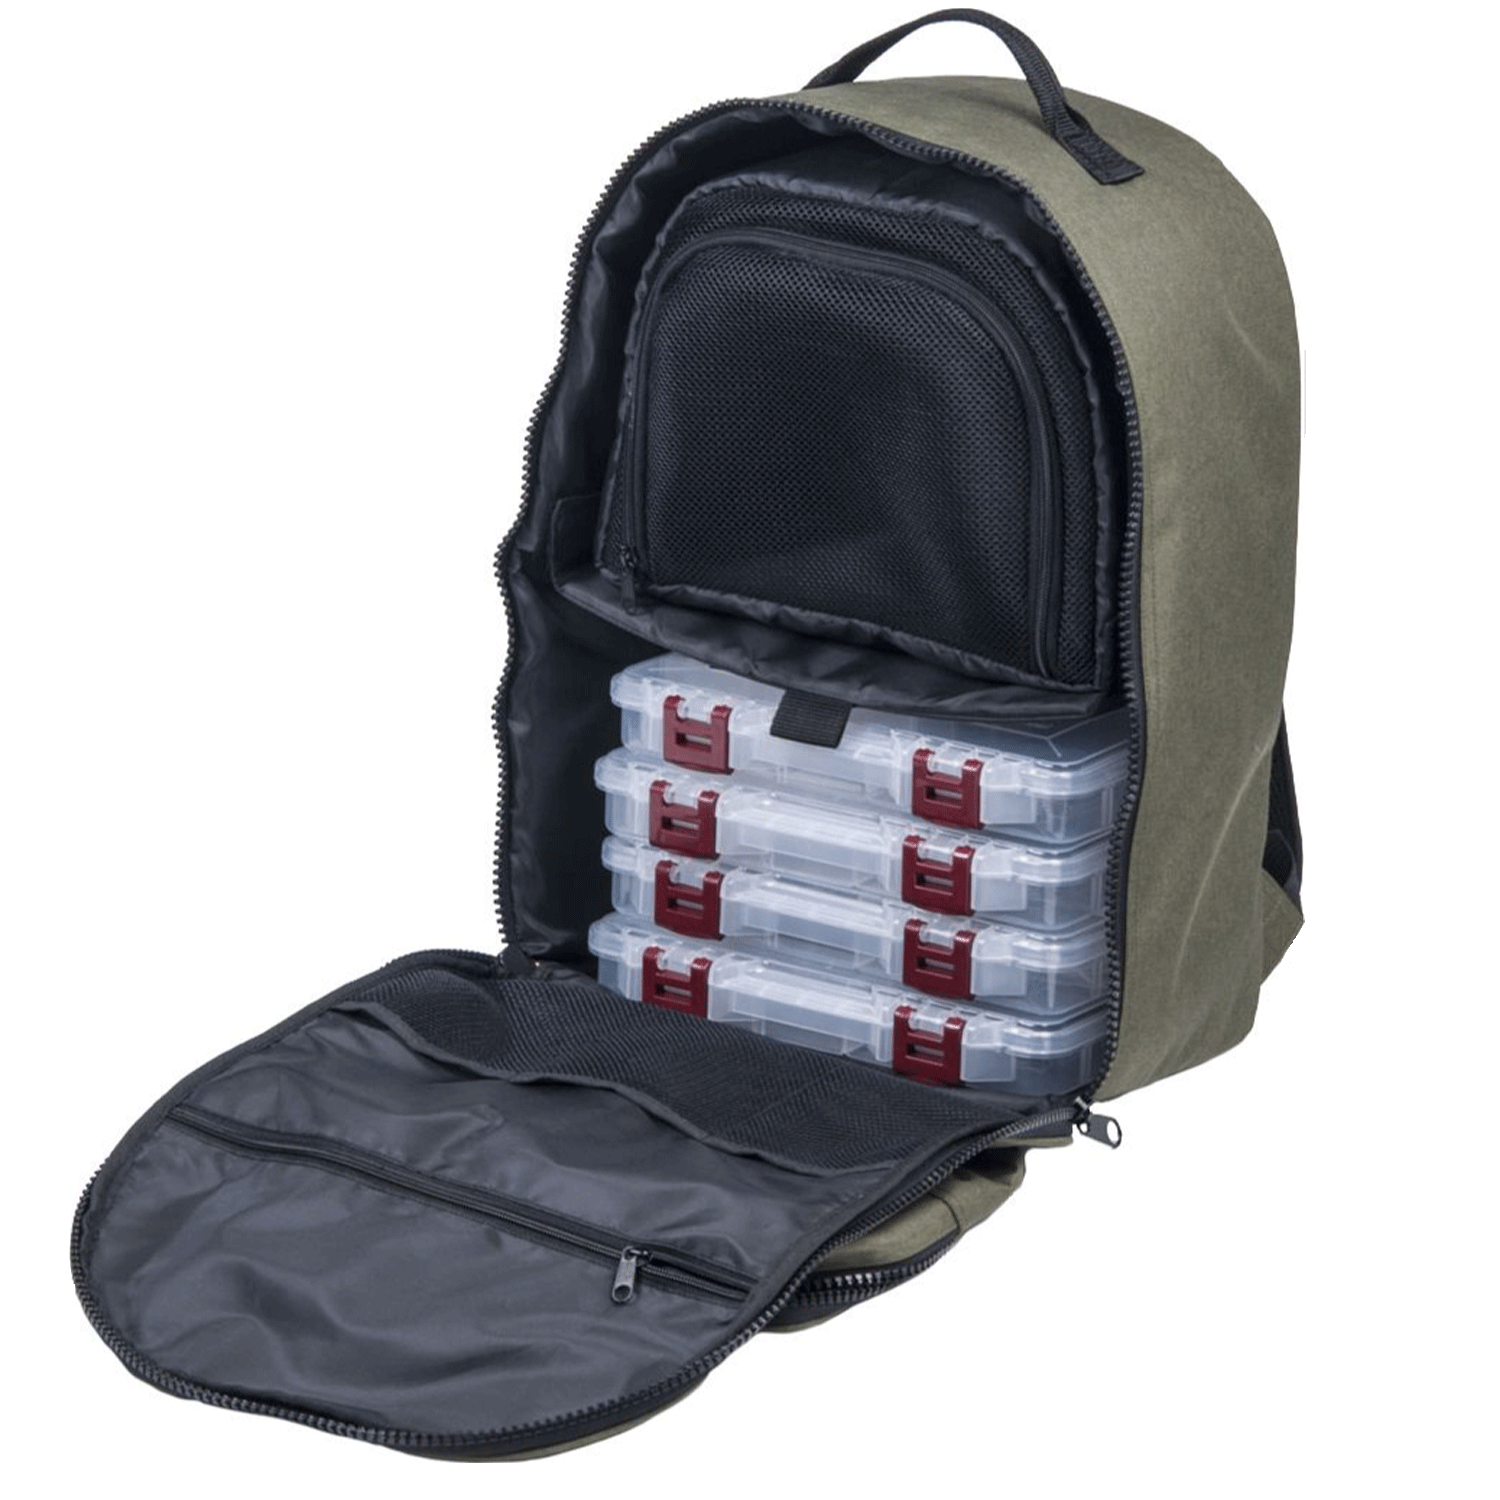 Plano - A-series 2.0 Tackle Backpack